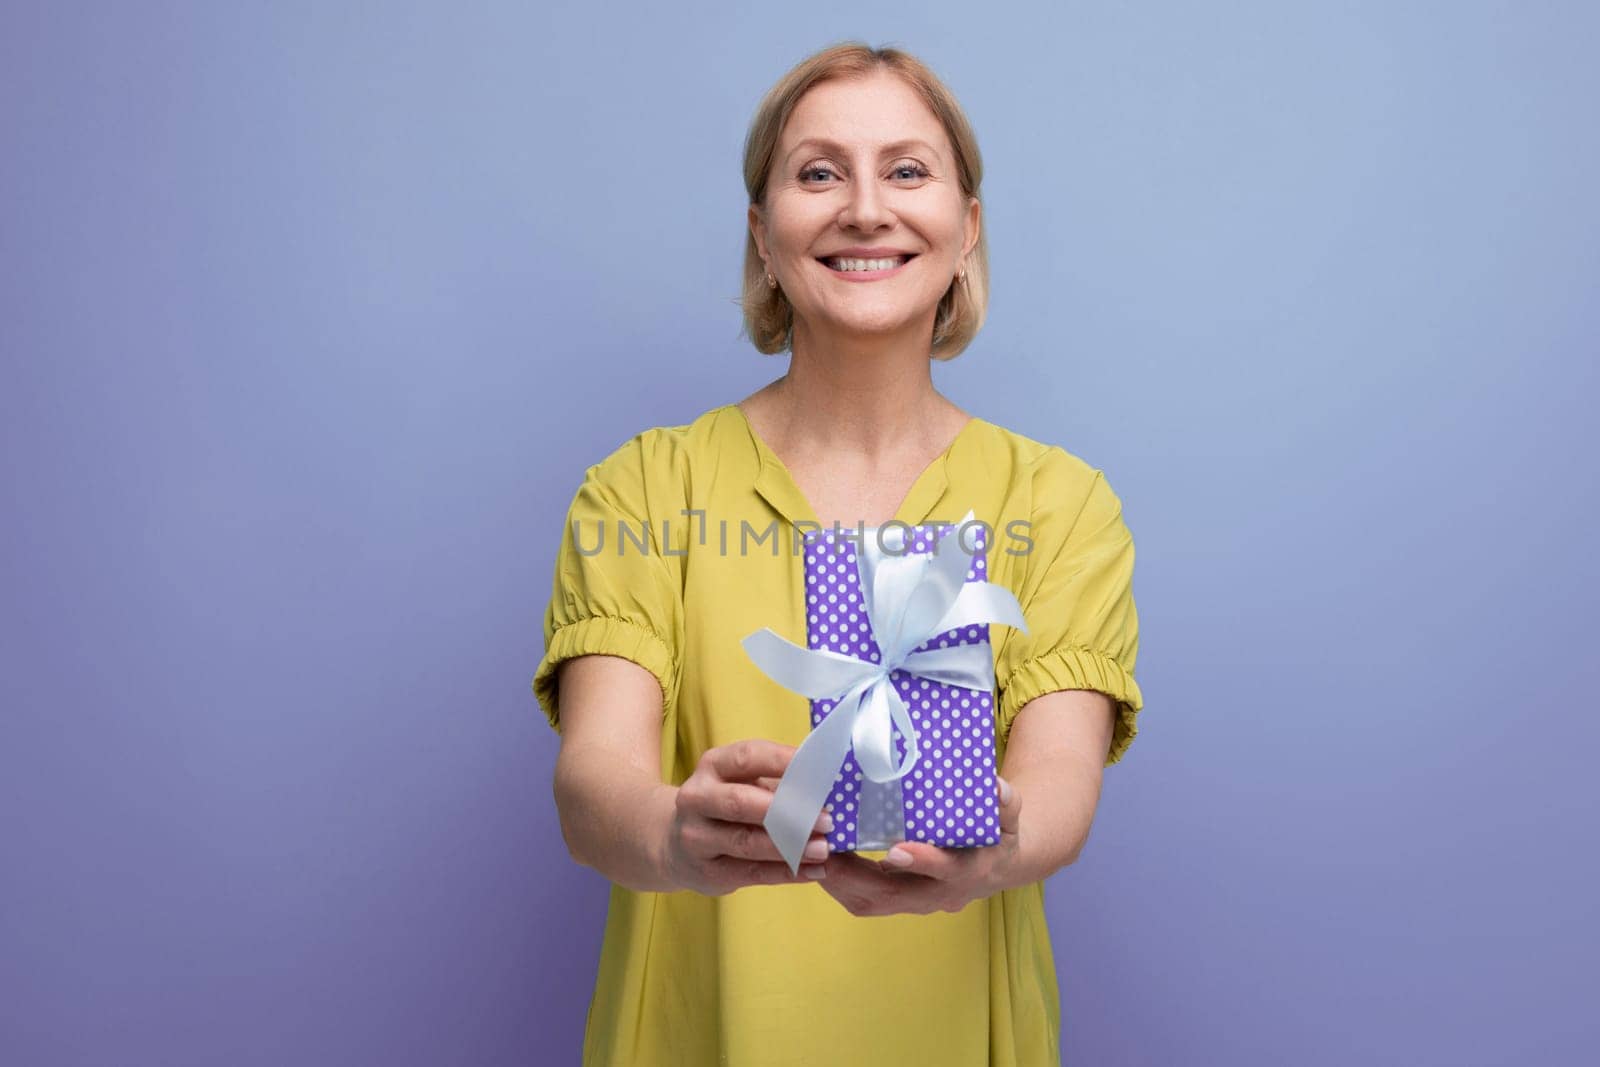 smiling blonde 50s woman holding out a gift box with a bow for a surprise.